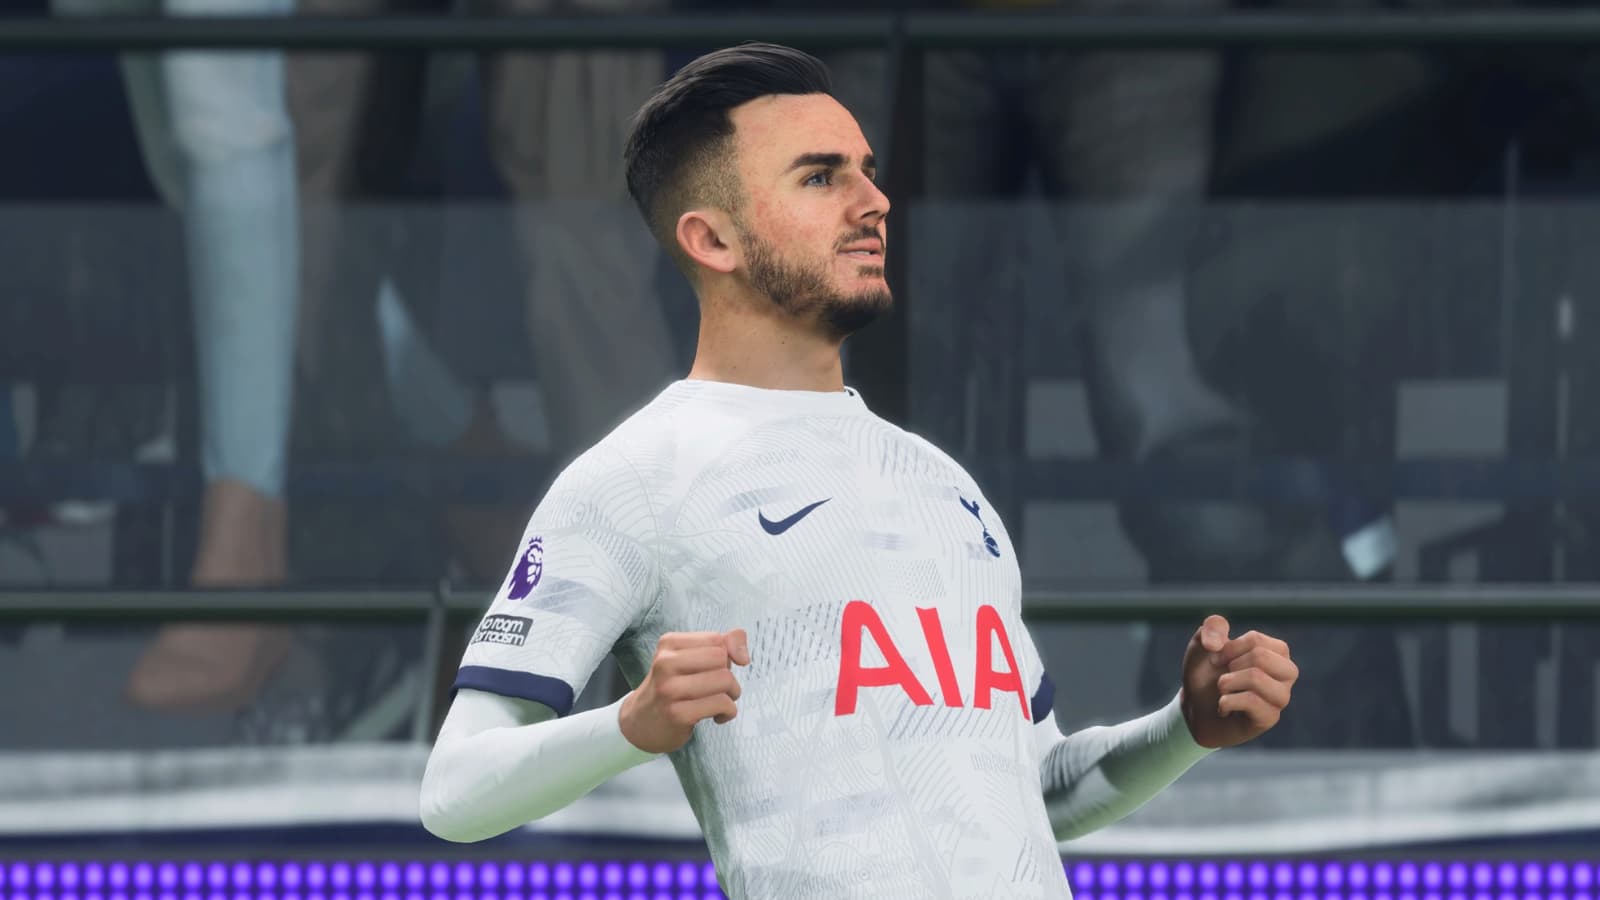 Tottenham players find out their official ratings for EA FC 24